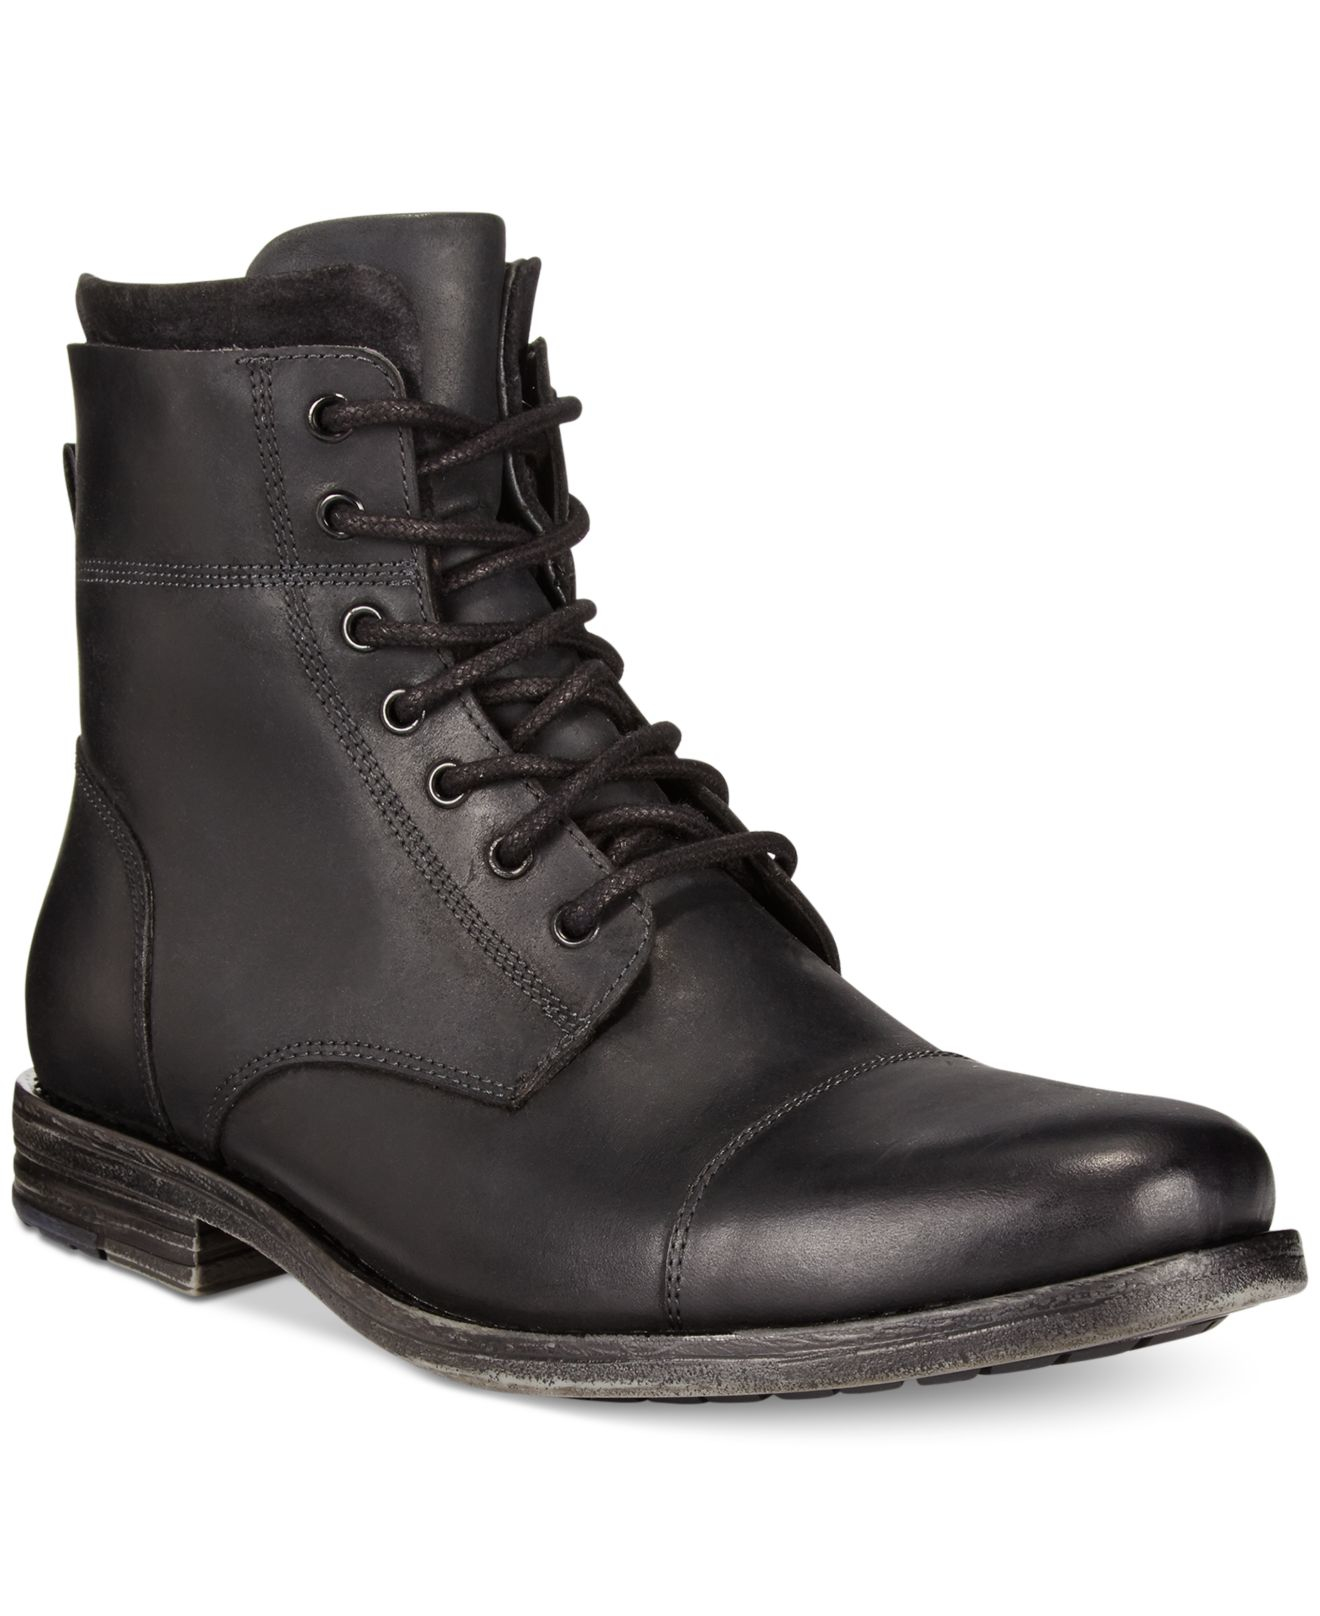 Lyst - Kenneth Cole Reaction Steer The Wheel Boots in Black for Men